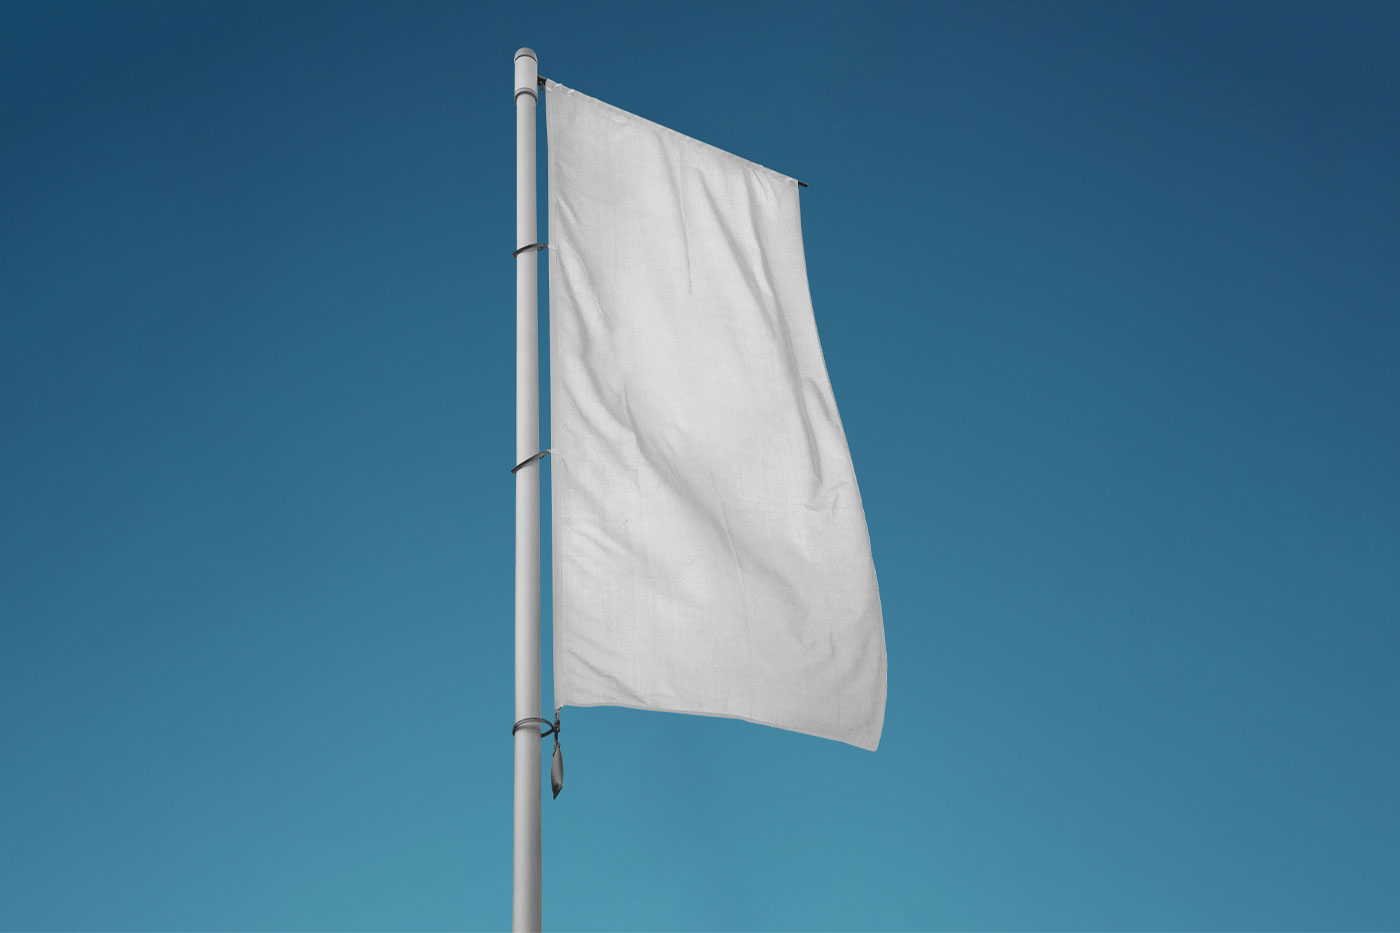 Perspective View of a Vertical Wrinkled Pole Flag Mockup FREE PSD